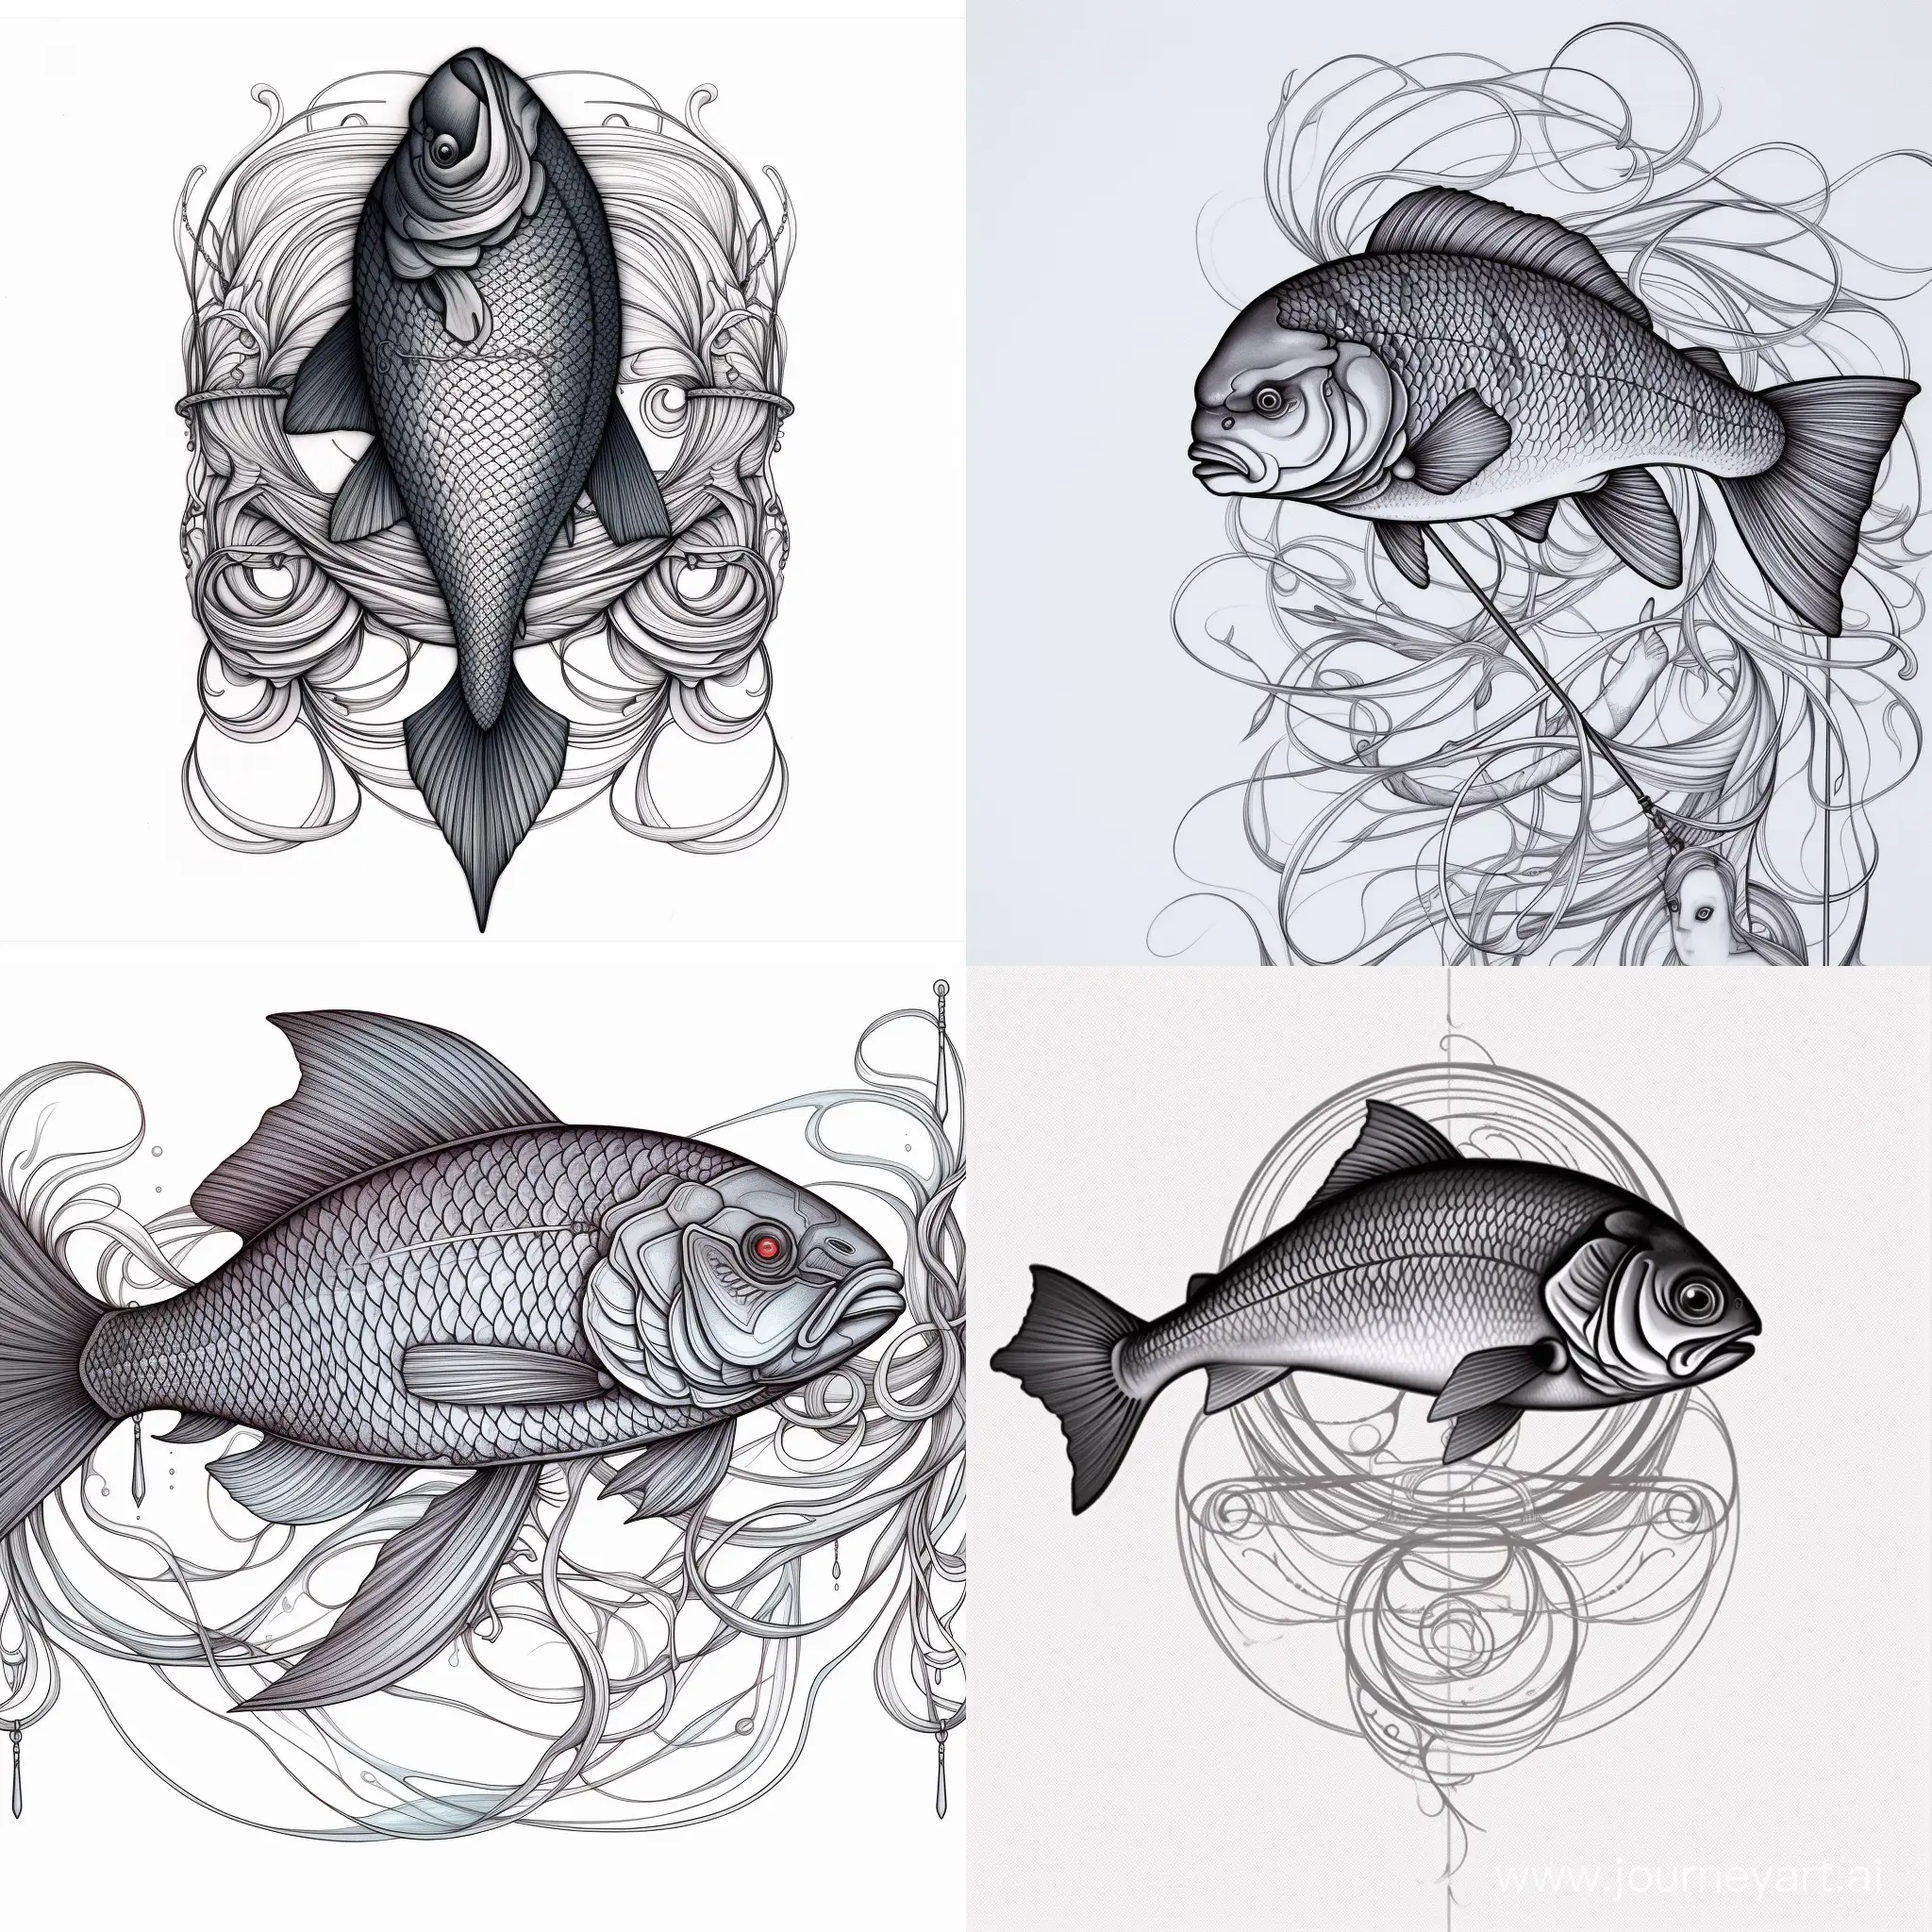 Show a rough outline and detailed inside of the cardial system inside a fish like salmon Pencil Art Single line Art drawing by Charlie Bowater